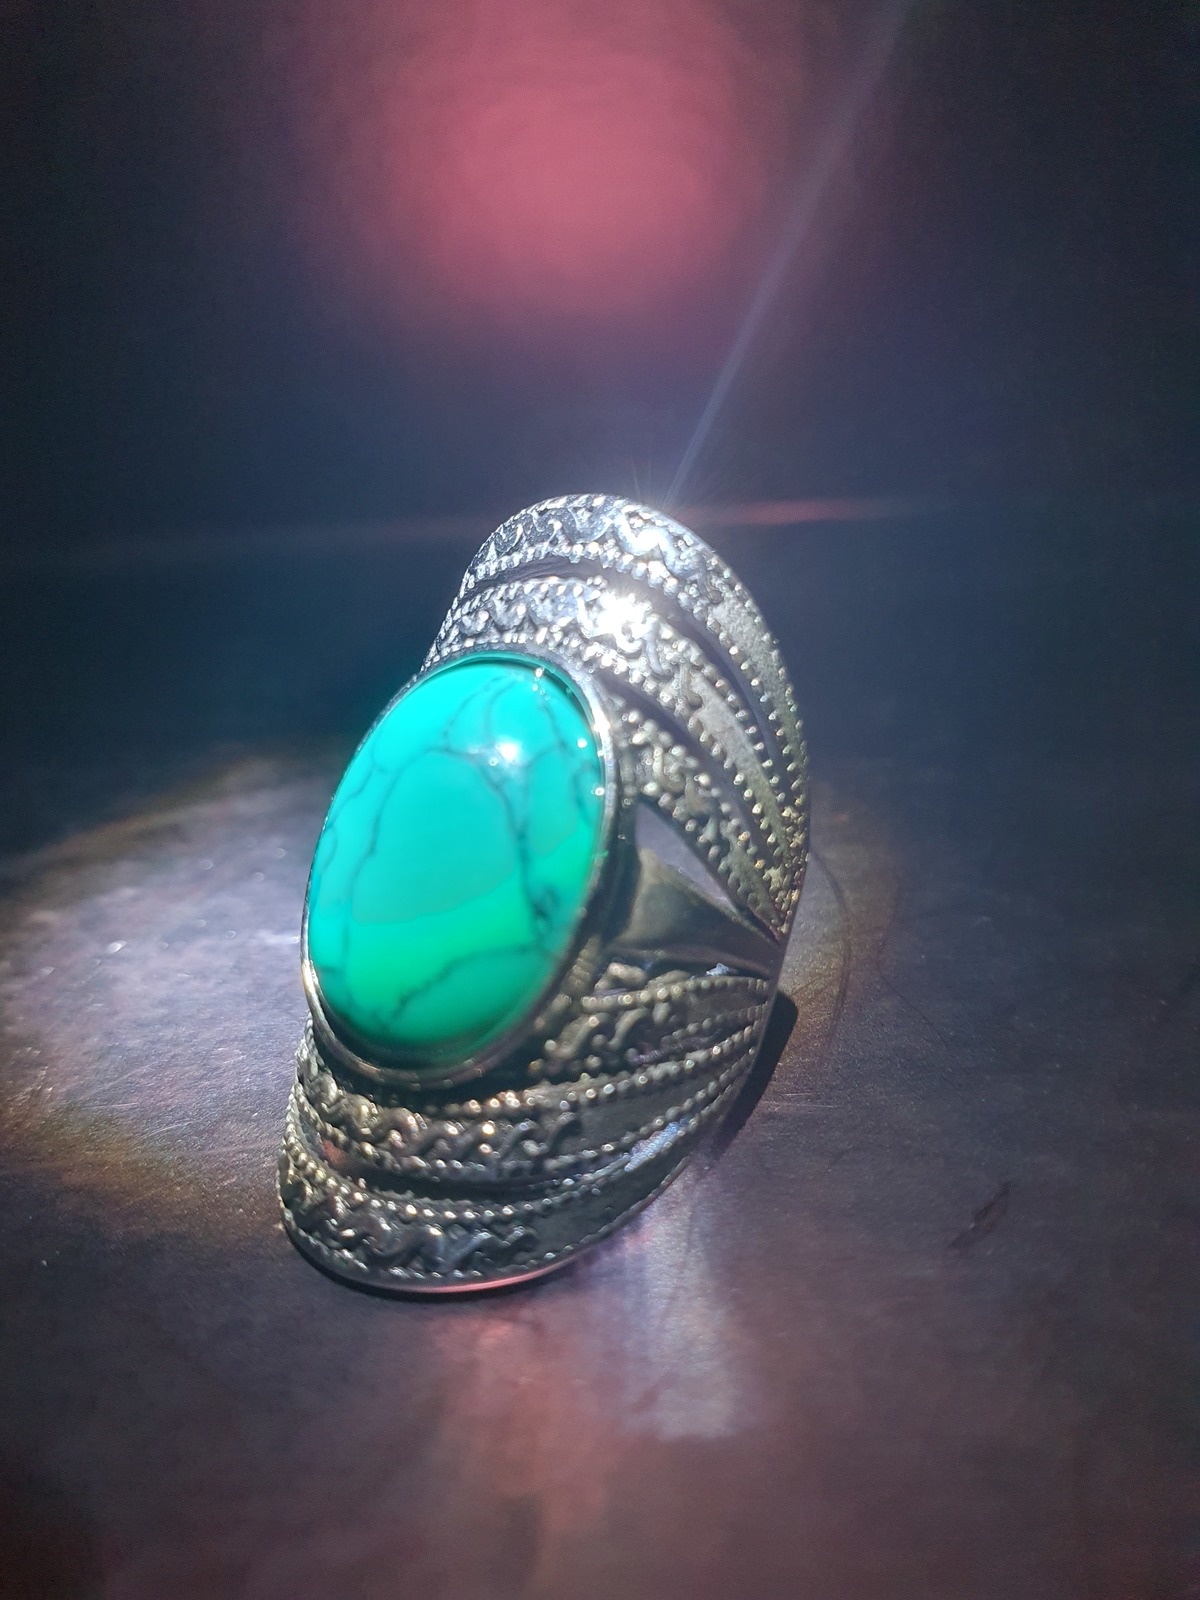 Haunted Magic Ring: Powerful Love Spell, Triple Cast Ring to Get Your Lover Back - $77.77